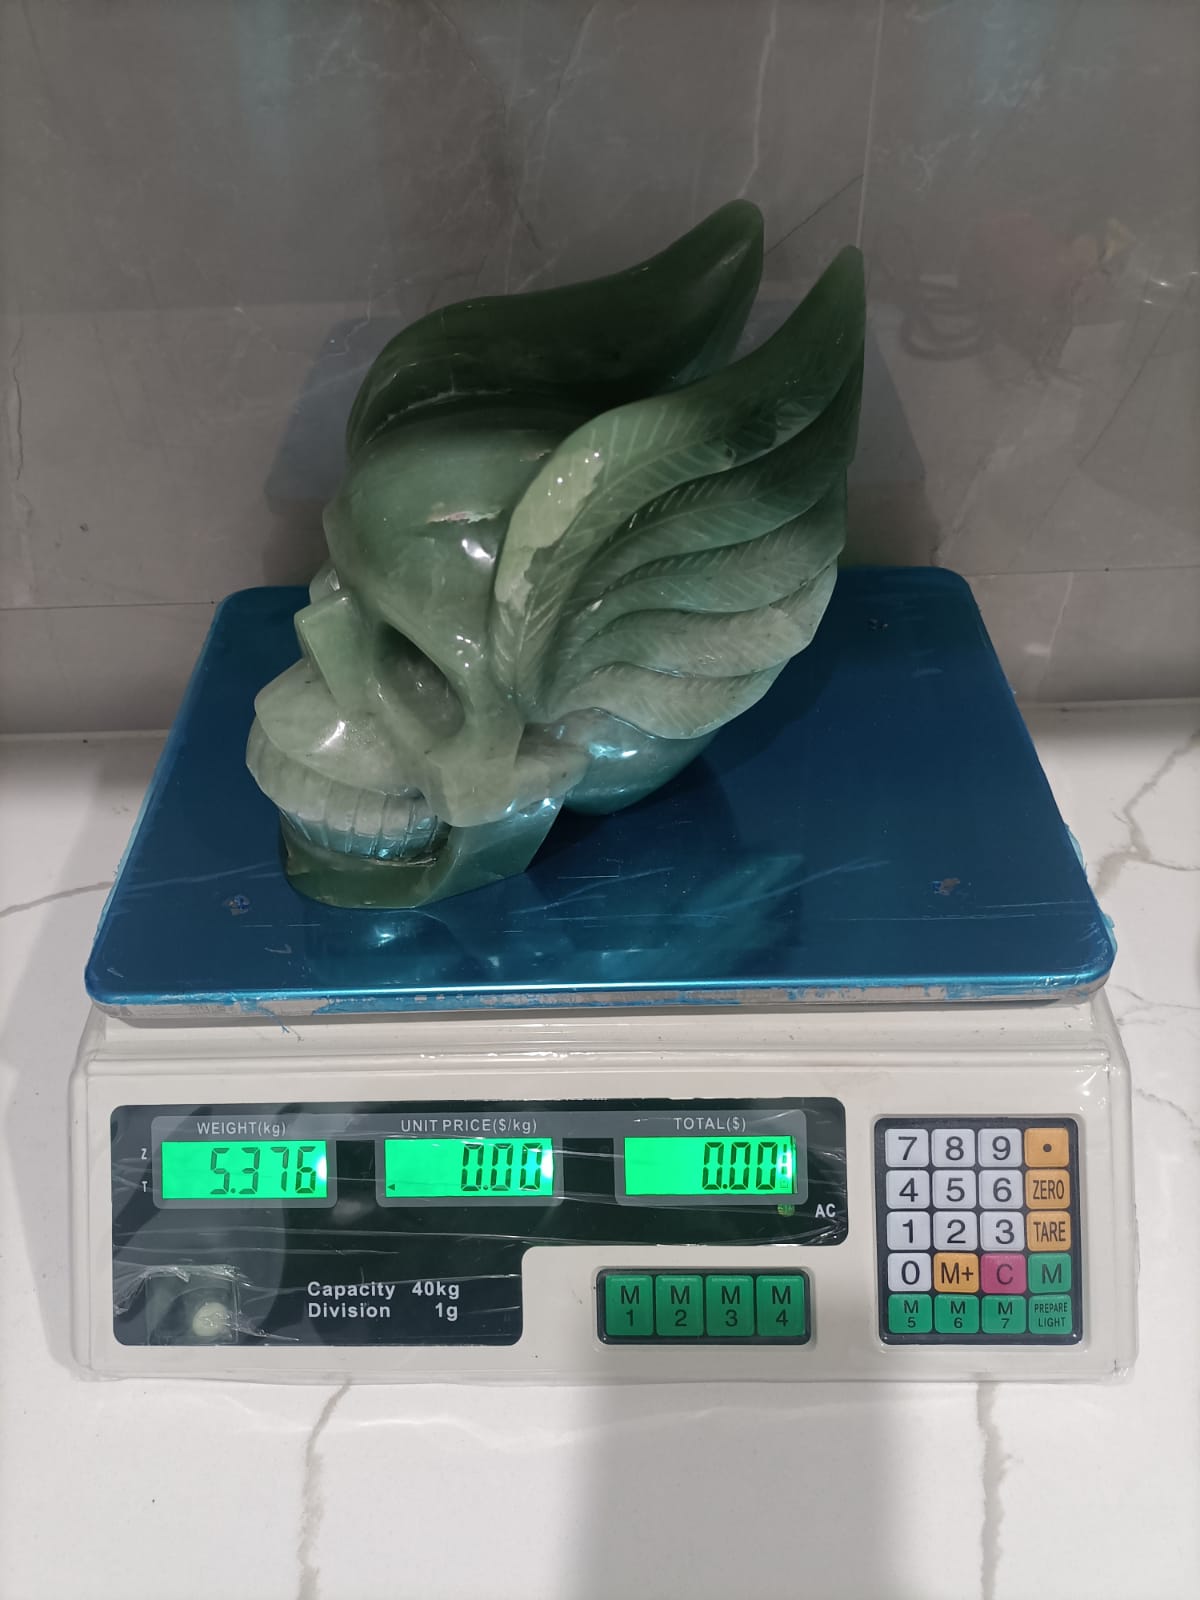 Green Aventurine Skull with Wings LARGE 5.382 Kg

